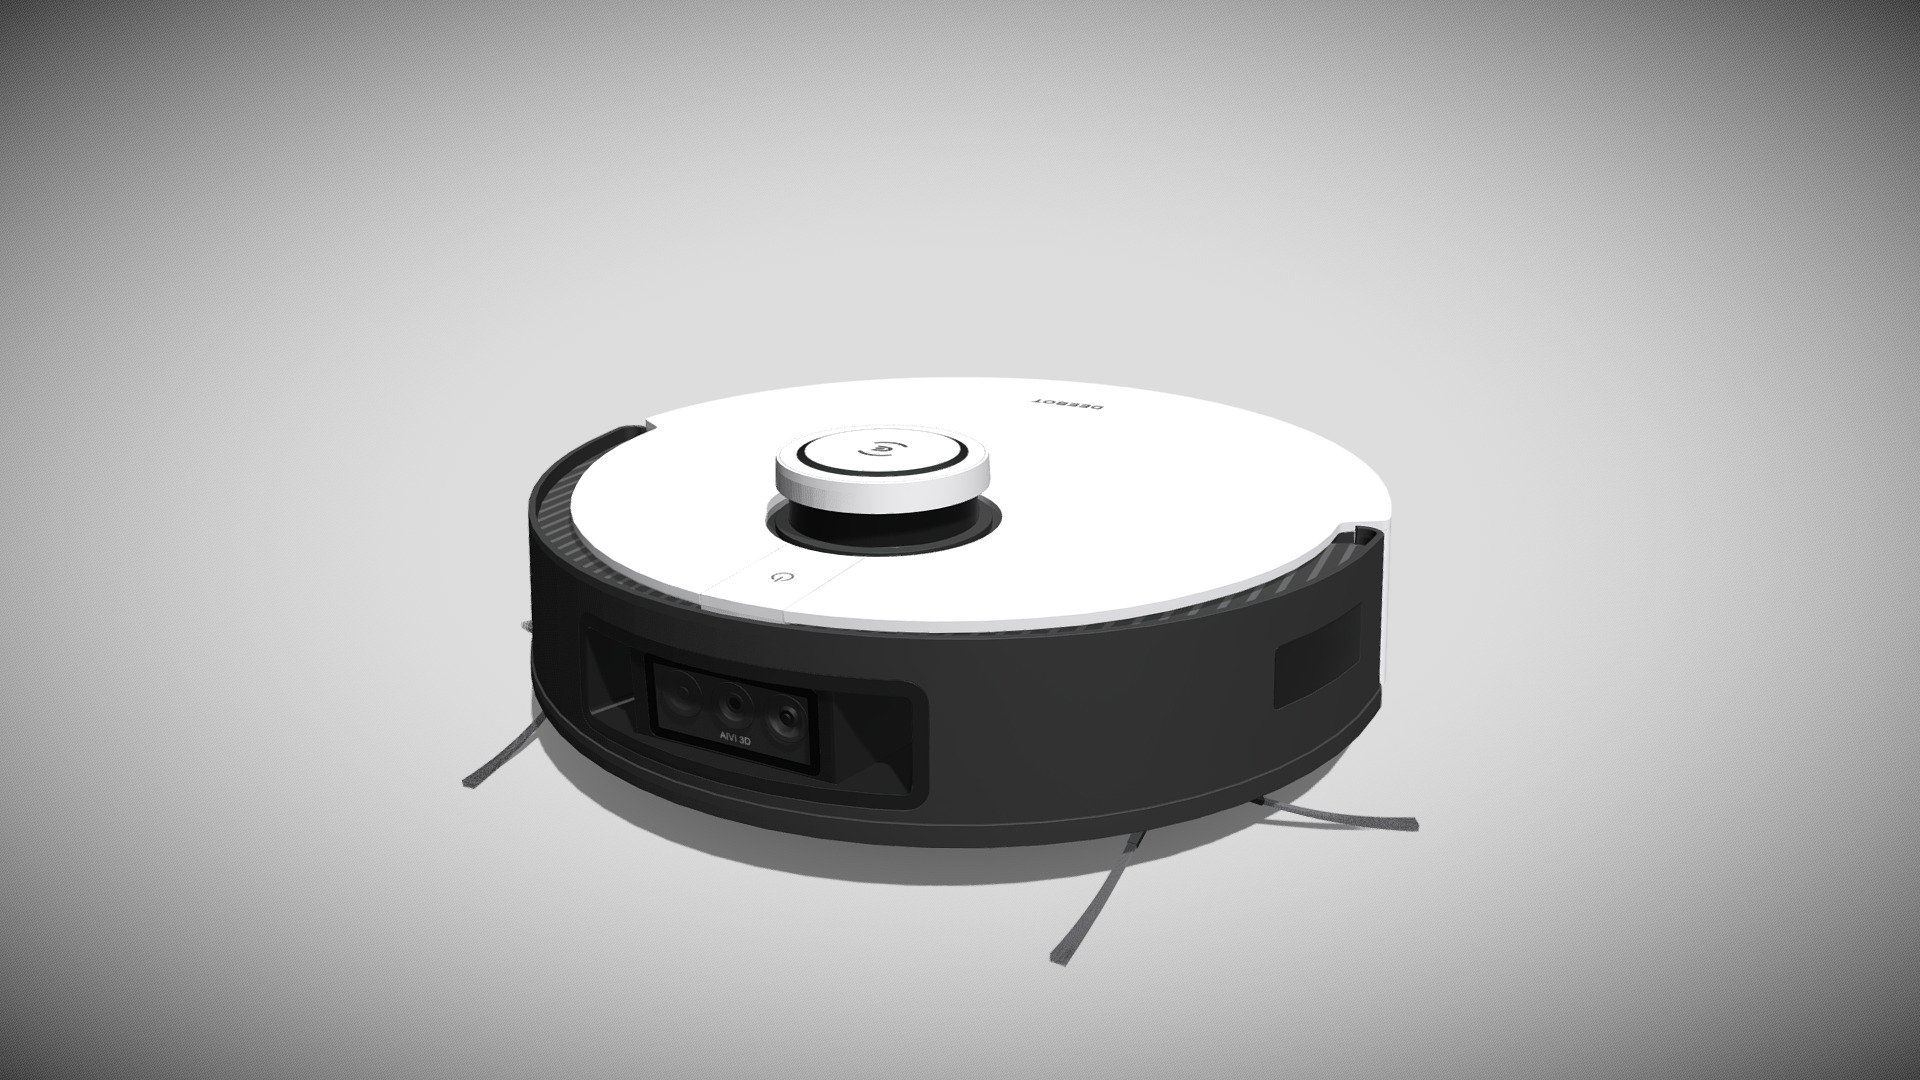 Detailed model of an ECOVACS DEEBOT X1 Plus Robot, modeled in Cinema 4D.The model was created using approximate real world dimensions.

The model has 167,430 polys and 192,091 vertices.

An additional file has been provided containing the original Cinema 4D project files with both standard and v-ray materials, textures and other 3d export files such as 3ds, fbx and obj 3d model